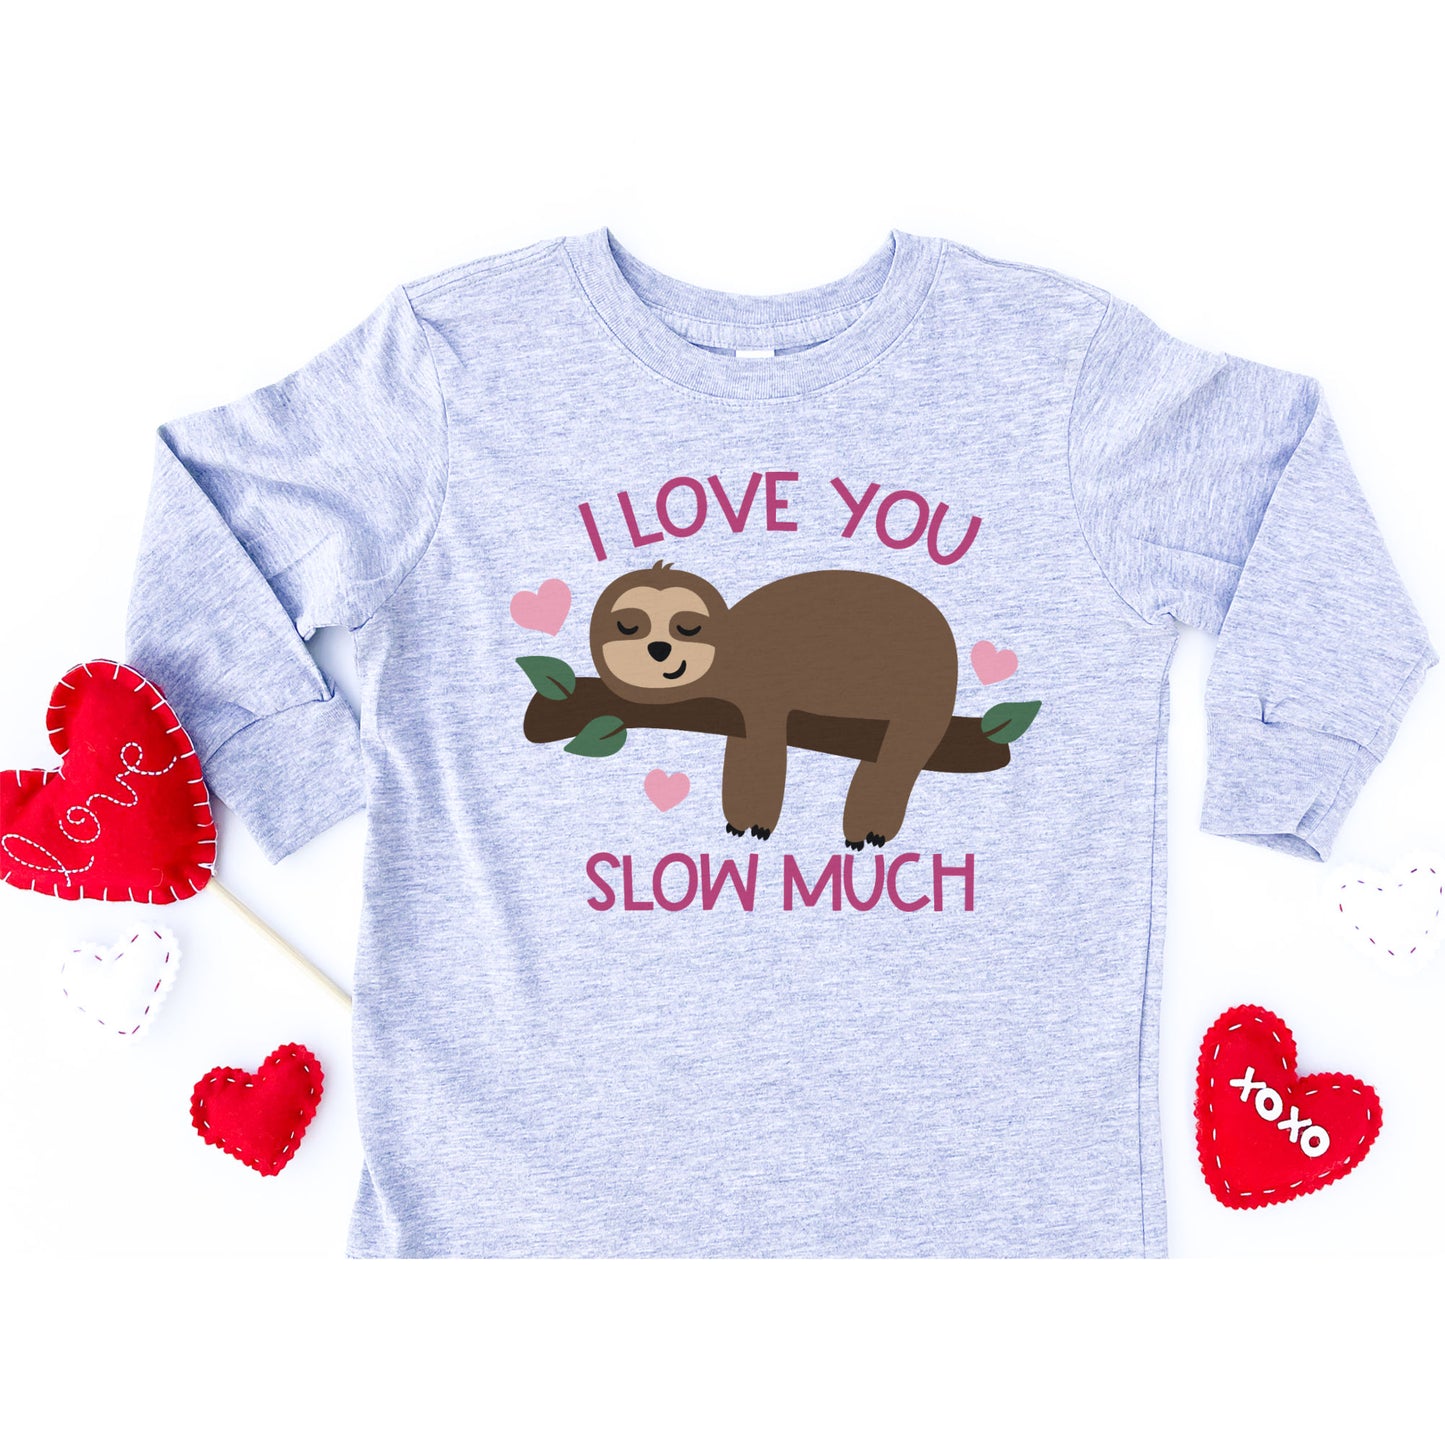 Love You Slow Much- Toddler/Youth